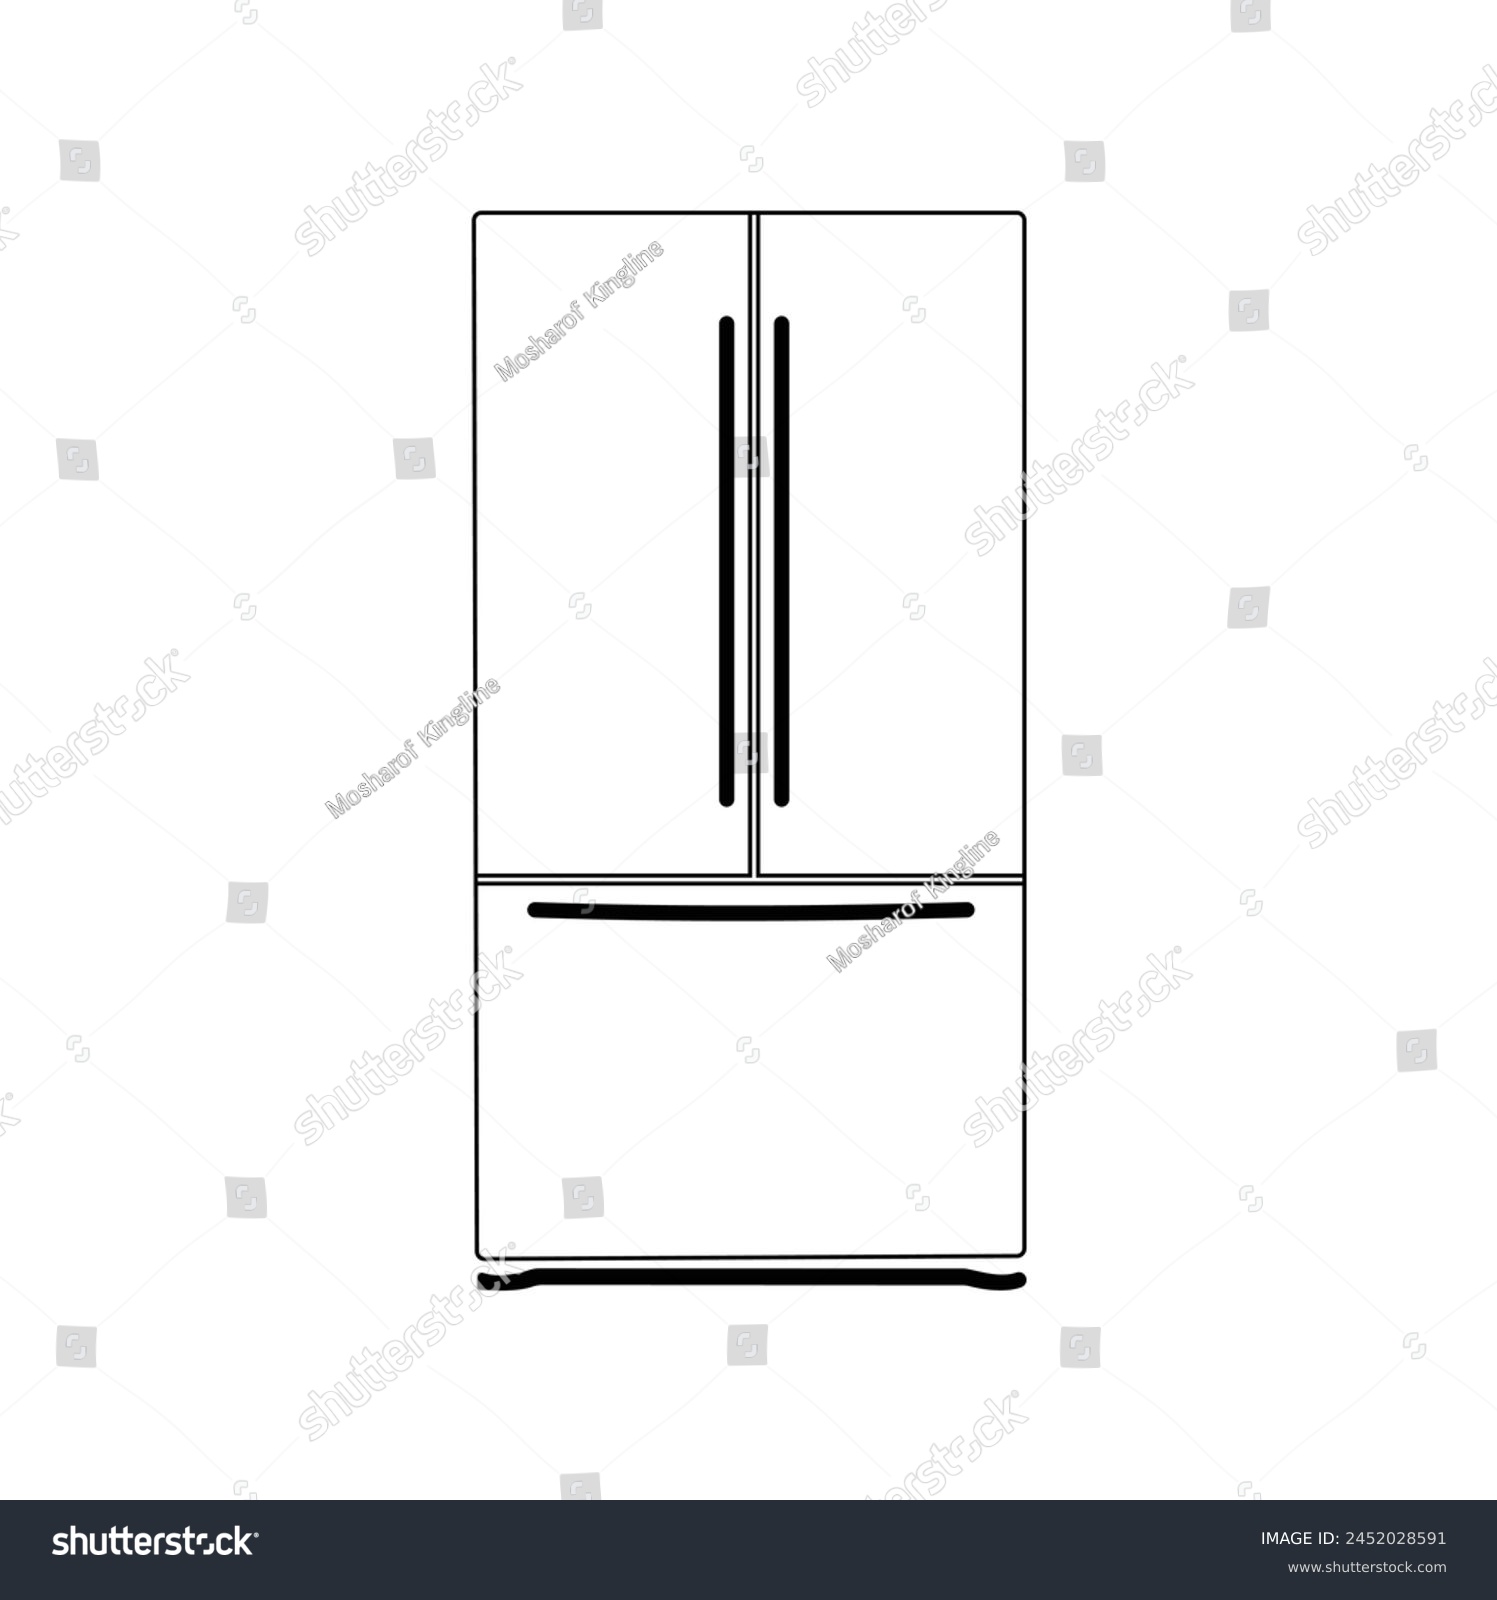 SVG of Refrigerator sizes chart line icon. Clipart image isolated on white background. New classic grey cooler icebox frig with Illustration style doodle and line art svg